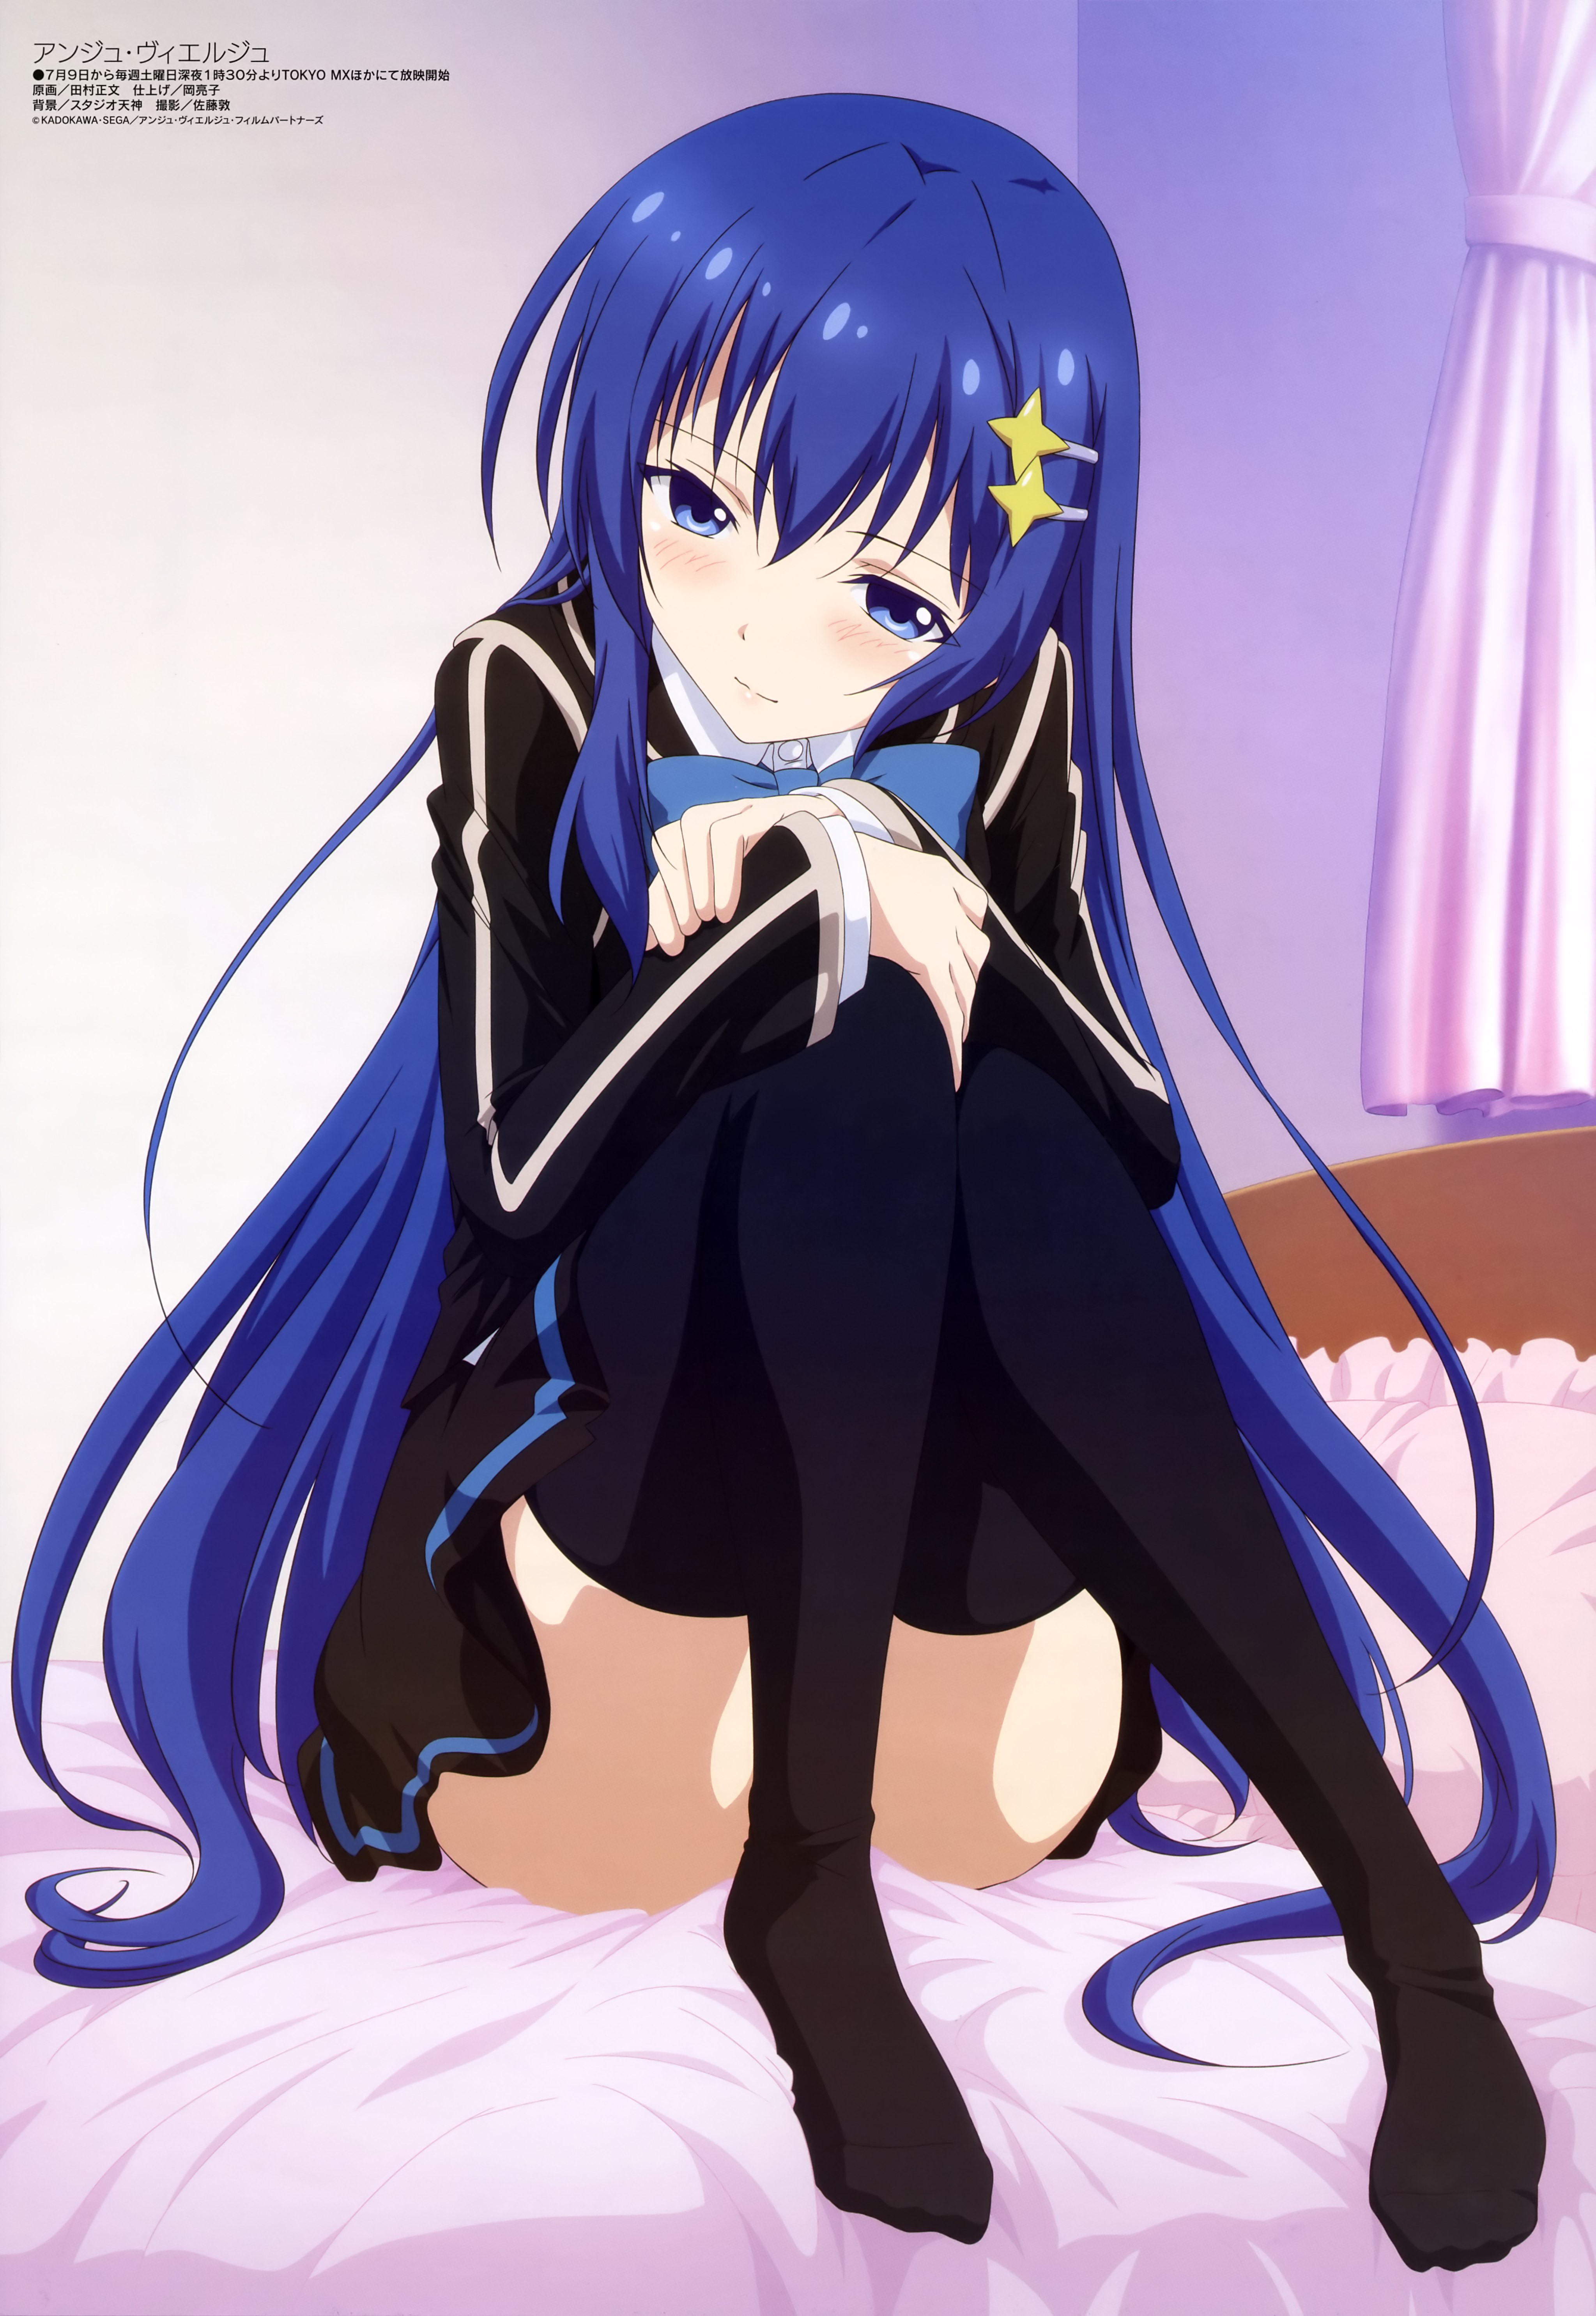 Anime 4094x5940 anime anime girls Ange Vierge long hair blue hair blue eyes bed thigh-highs looking at viewer stockings thighs together sitting thighs legs in bed